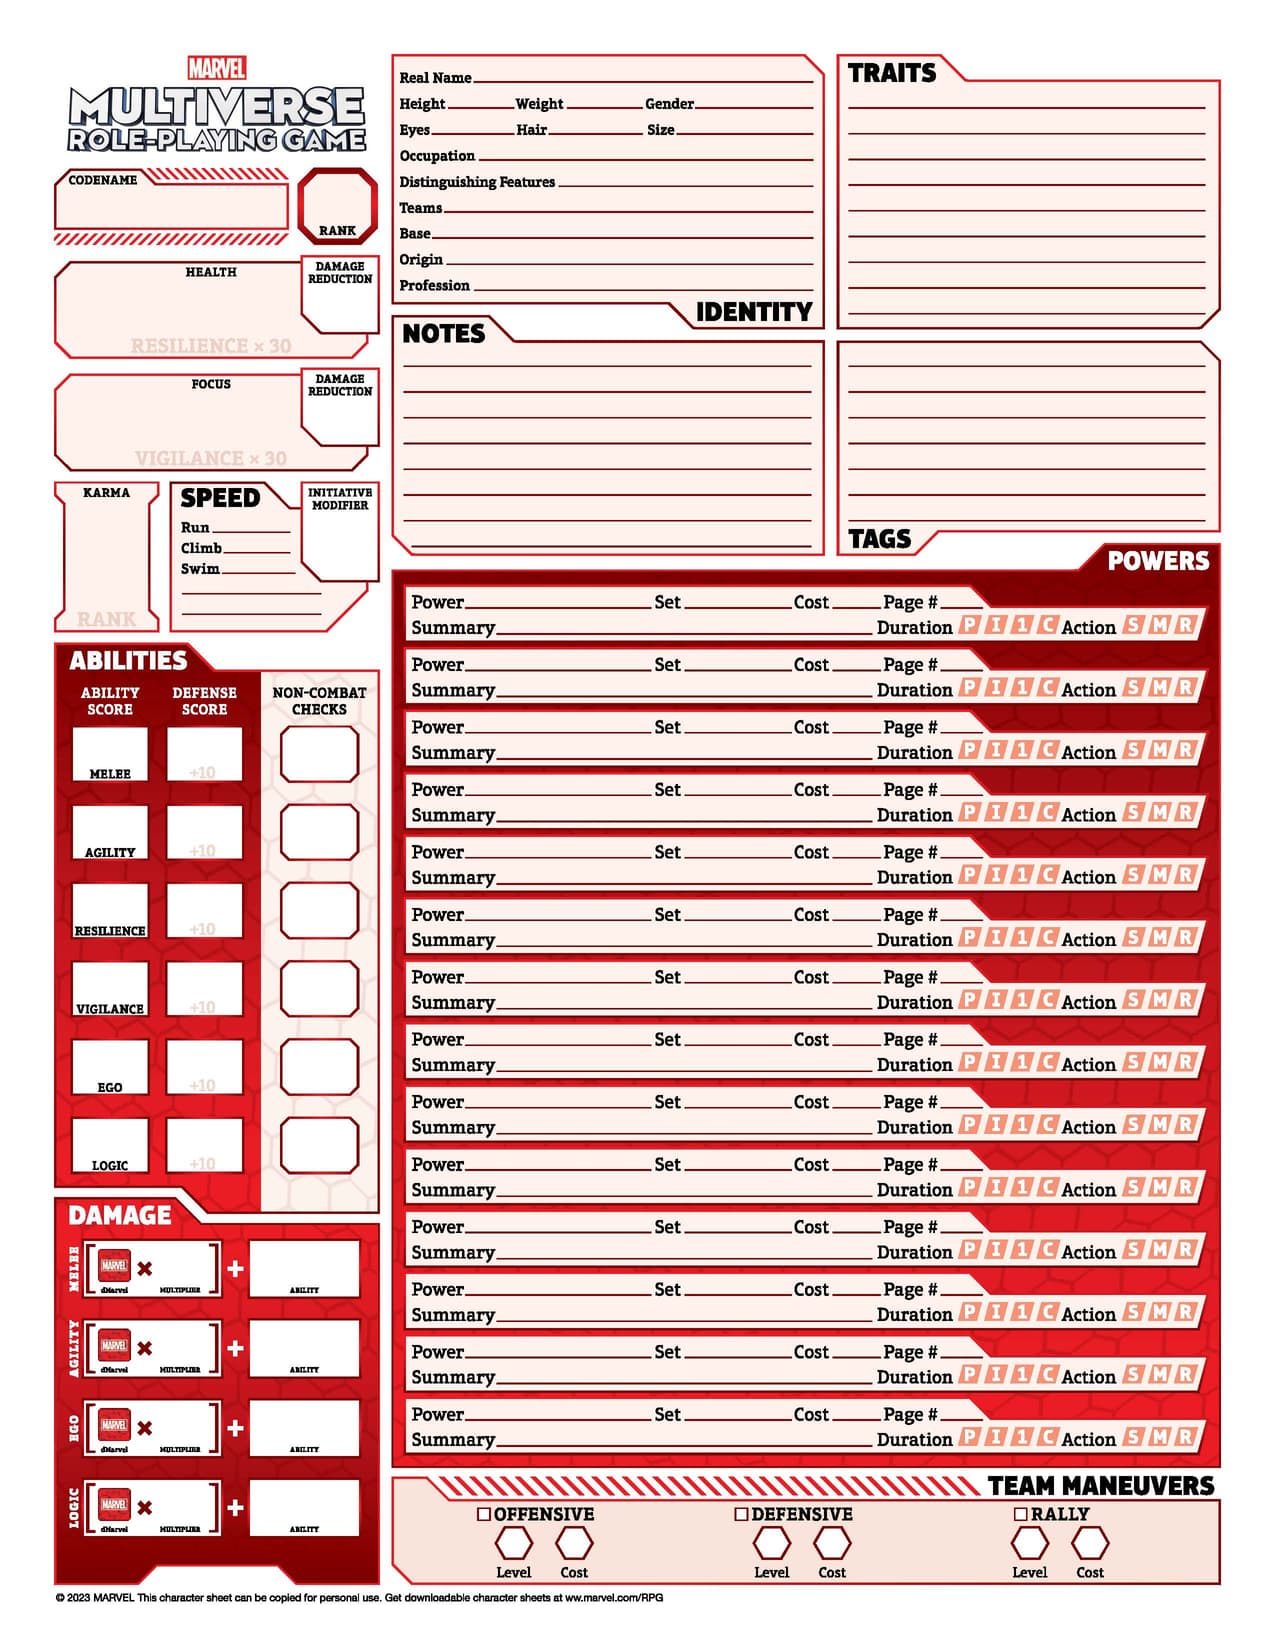 Marvel Multiverse Role-Playing Game Character Sheet Page 1